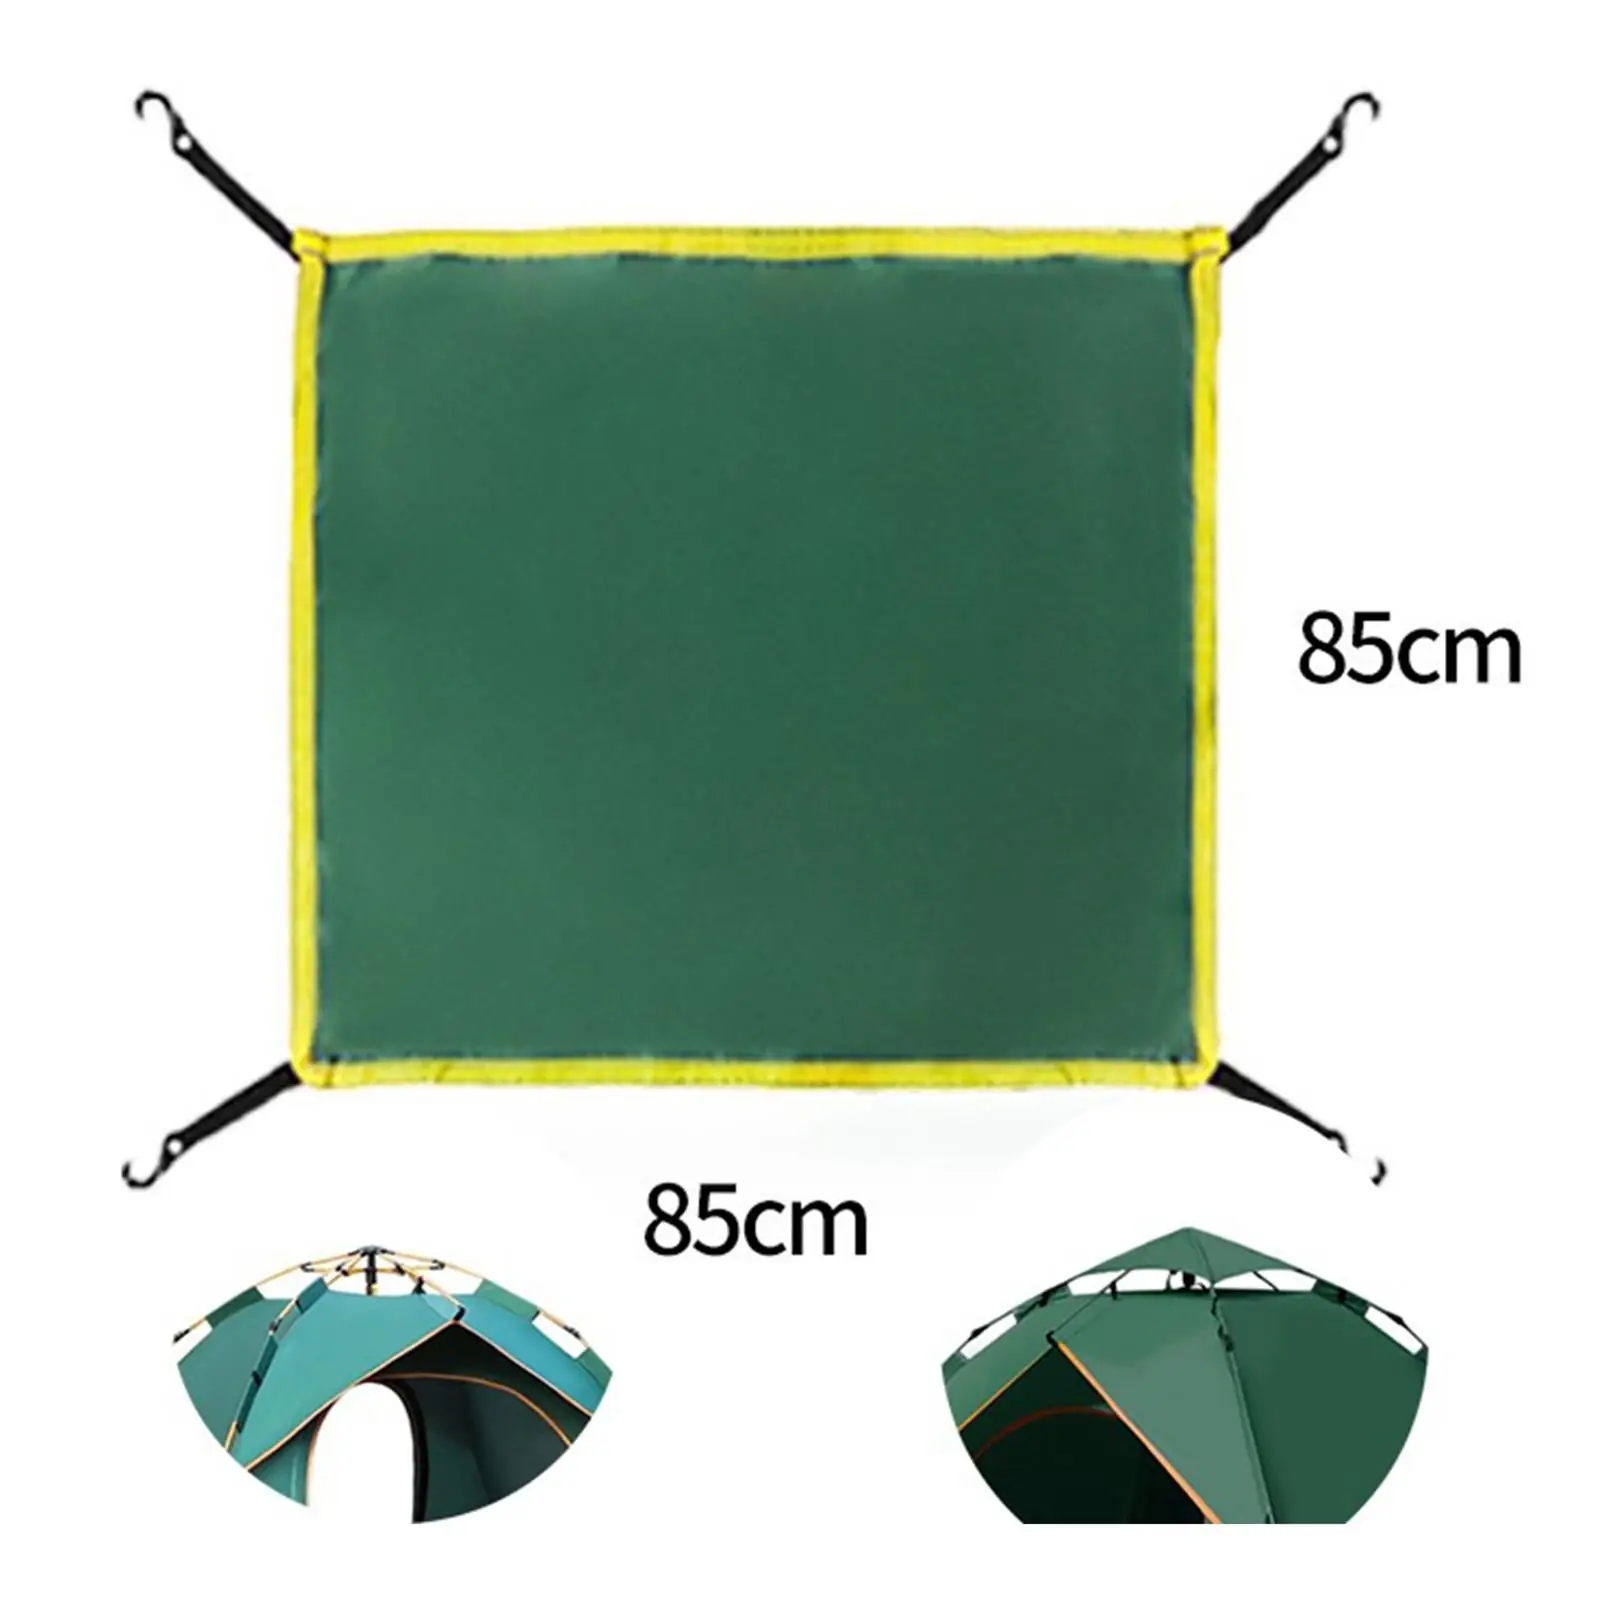 Tent Top Cover Tarp Tarpaulin Covers Waterproof Portable Dome Tent Cover for Backpacking Outdoor Fishing Camping Hiking